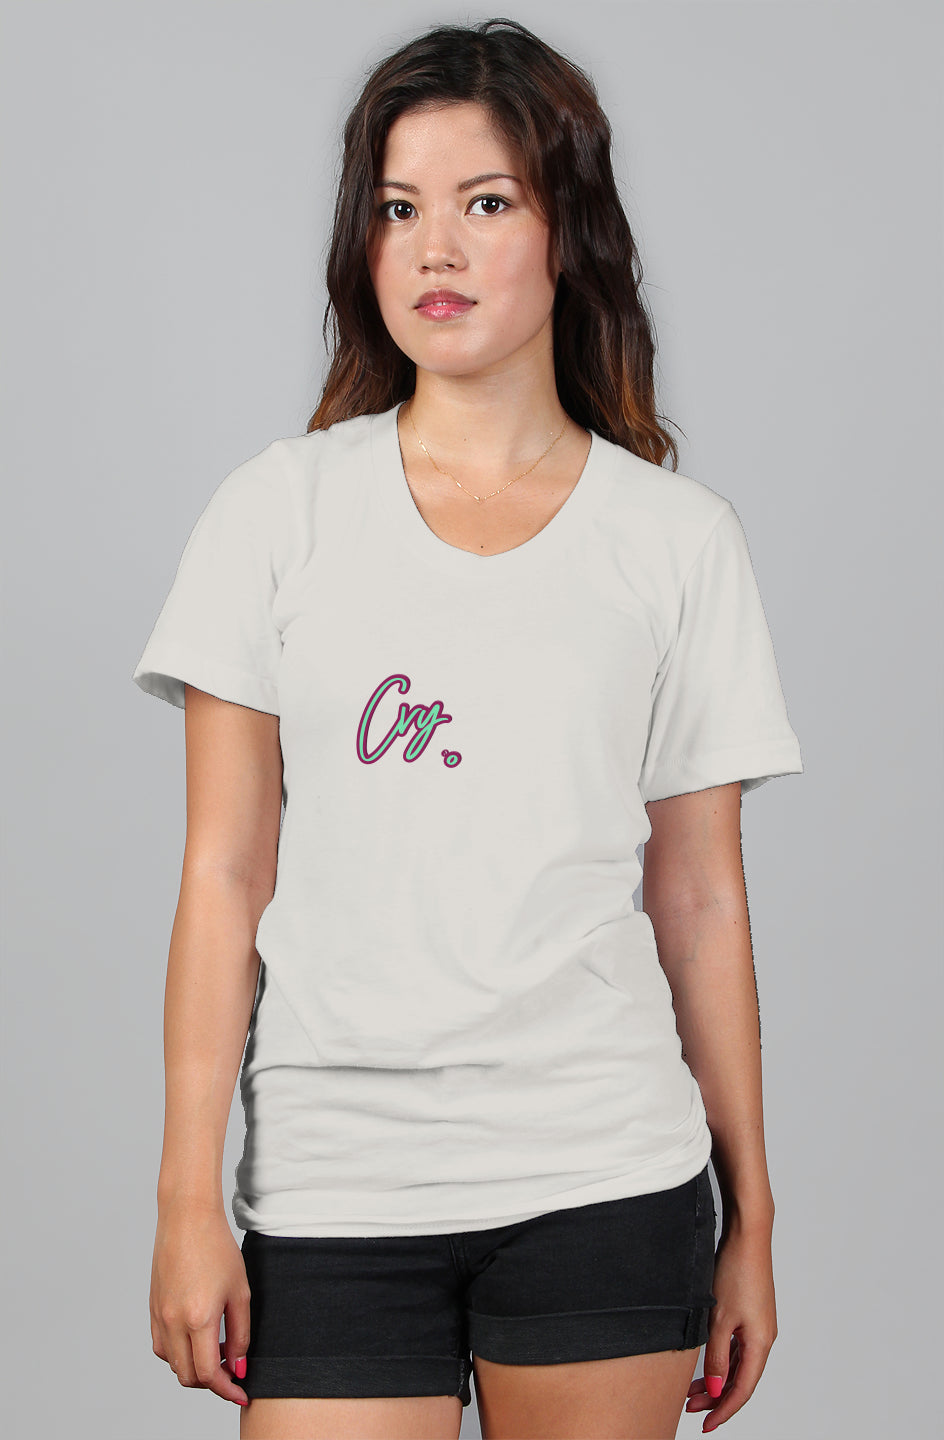 CWS Sig Vintage White womens relaxed t shirt